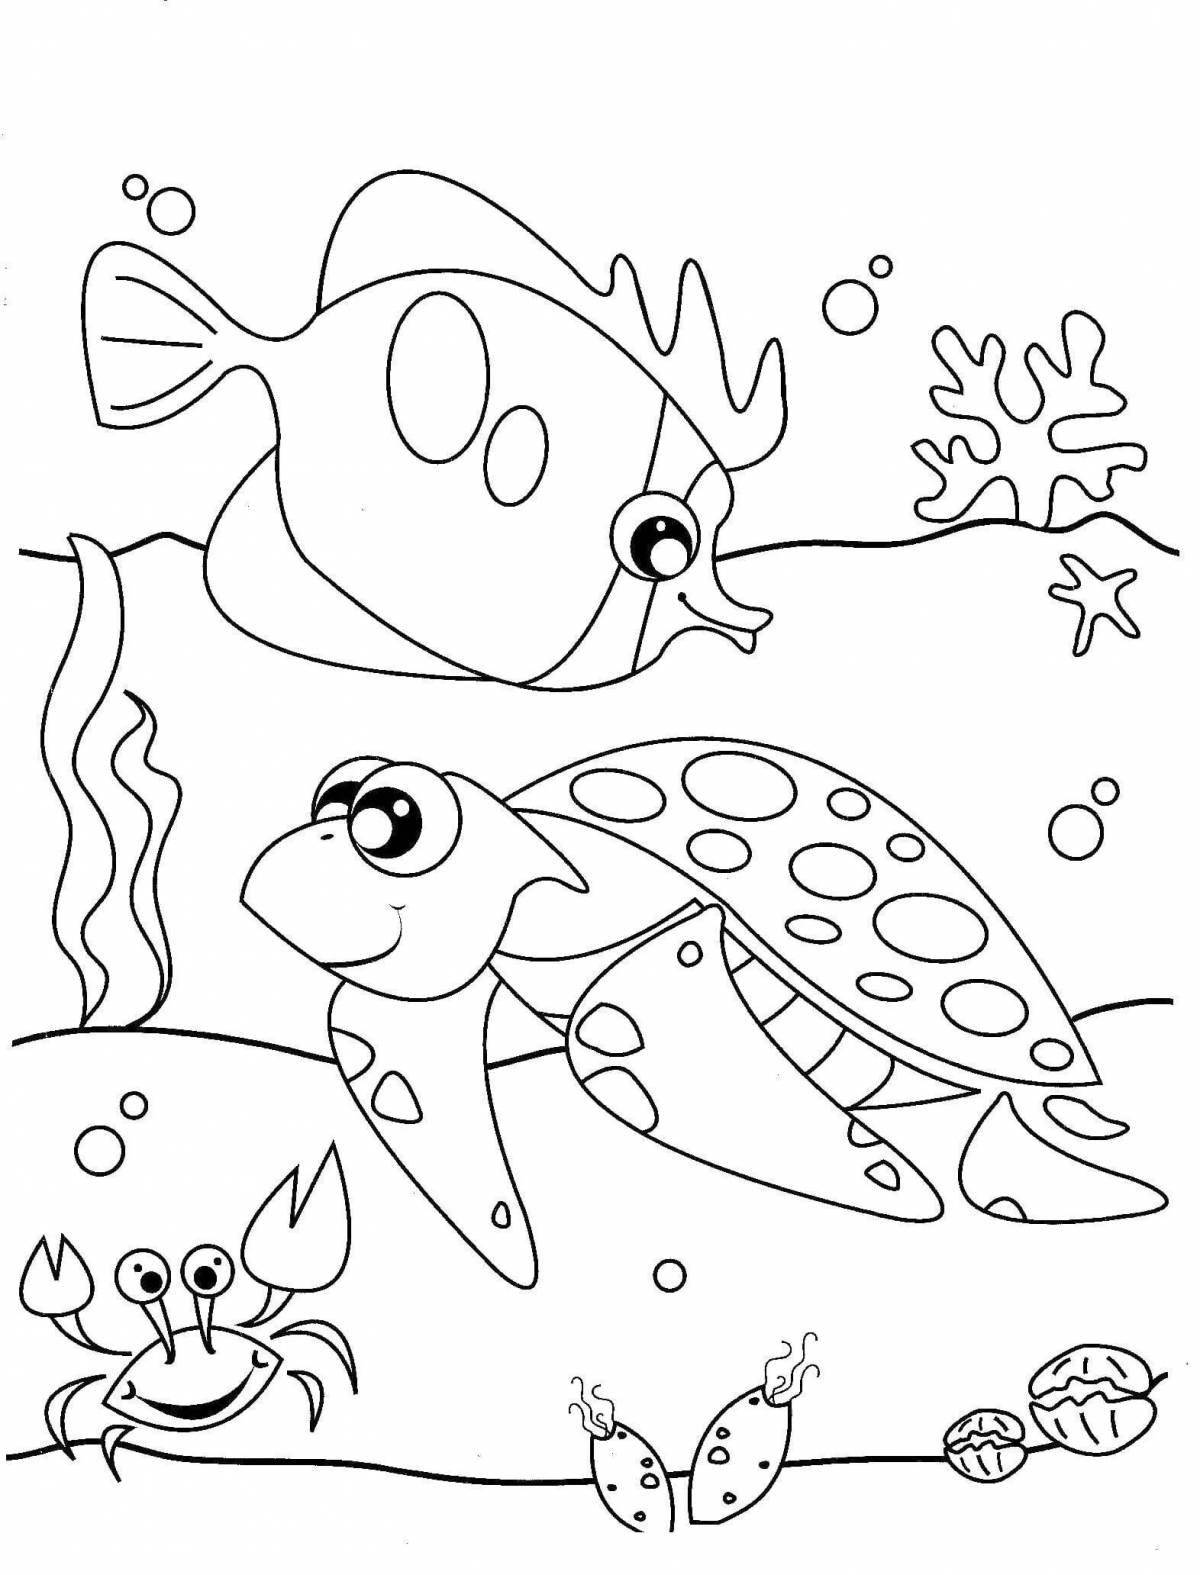 Coloring book joyful sea for children 6-7 years old